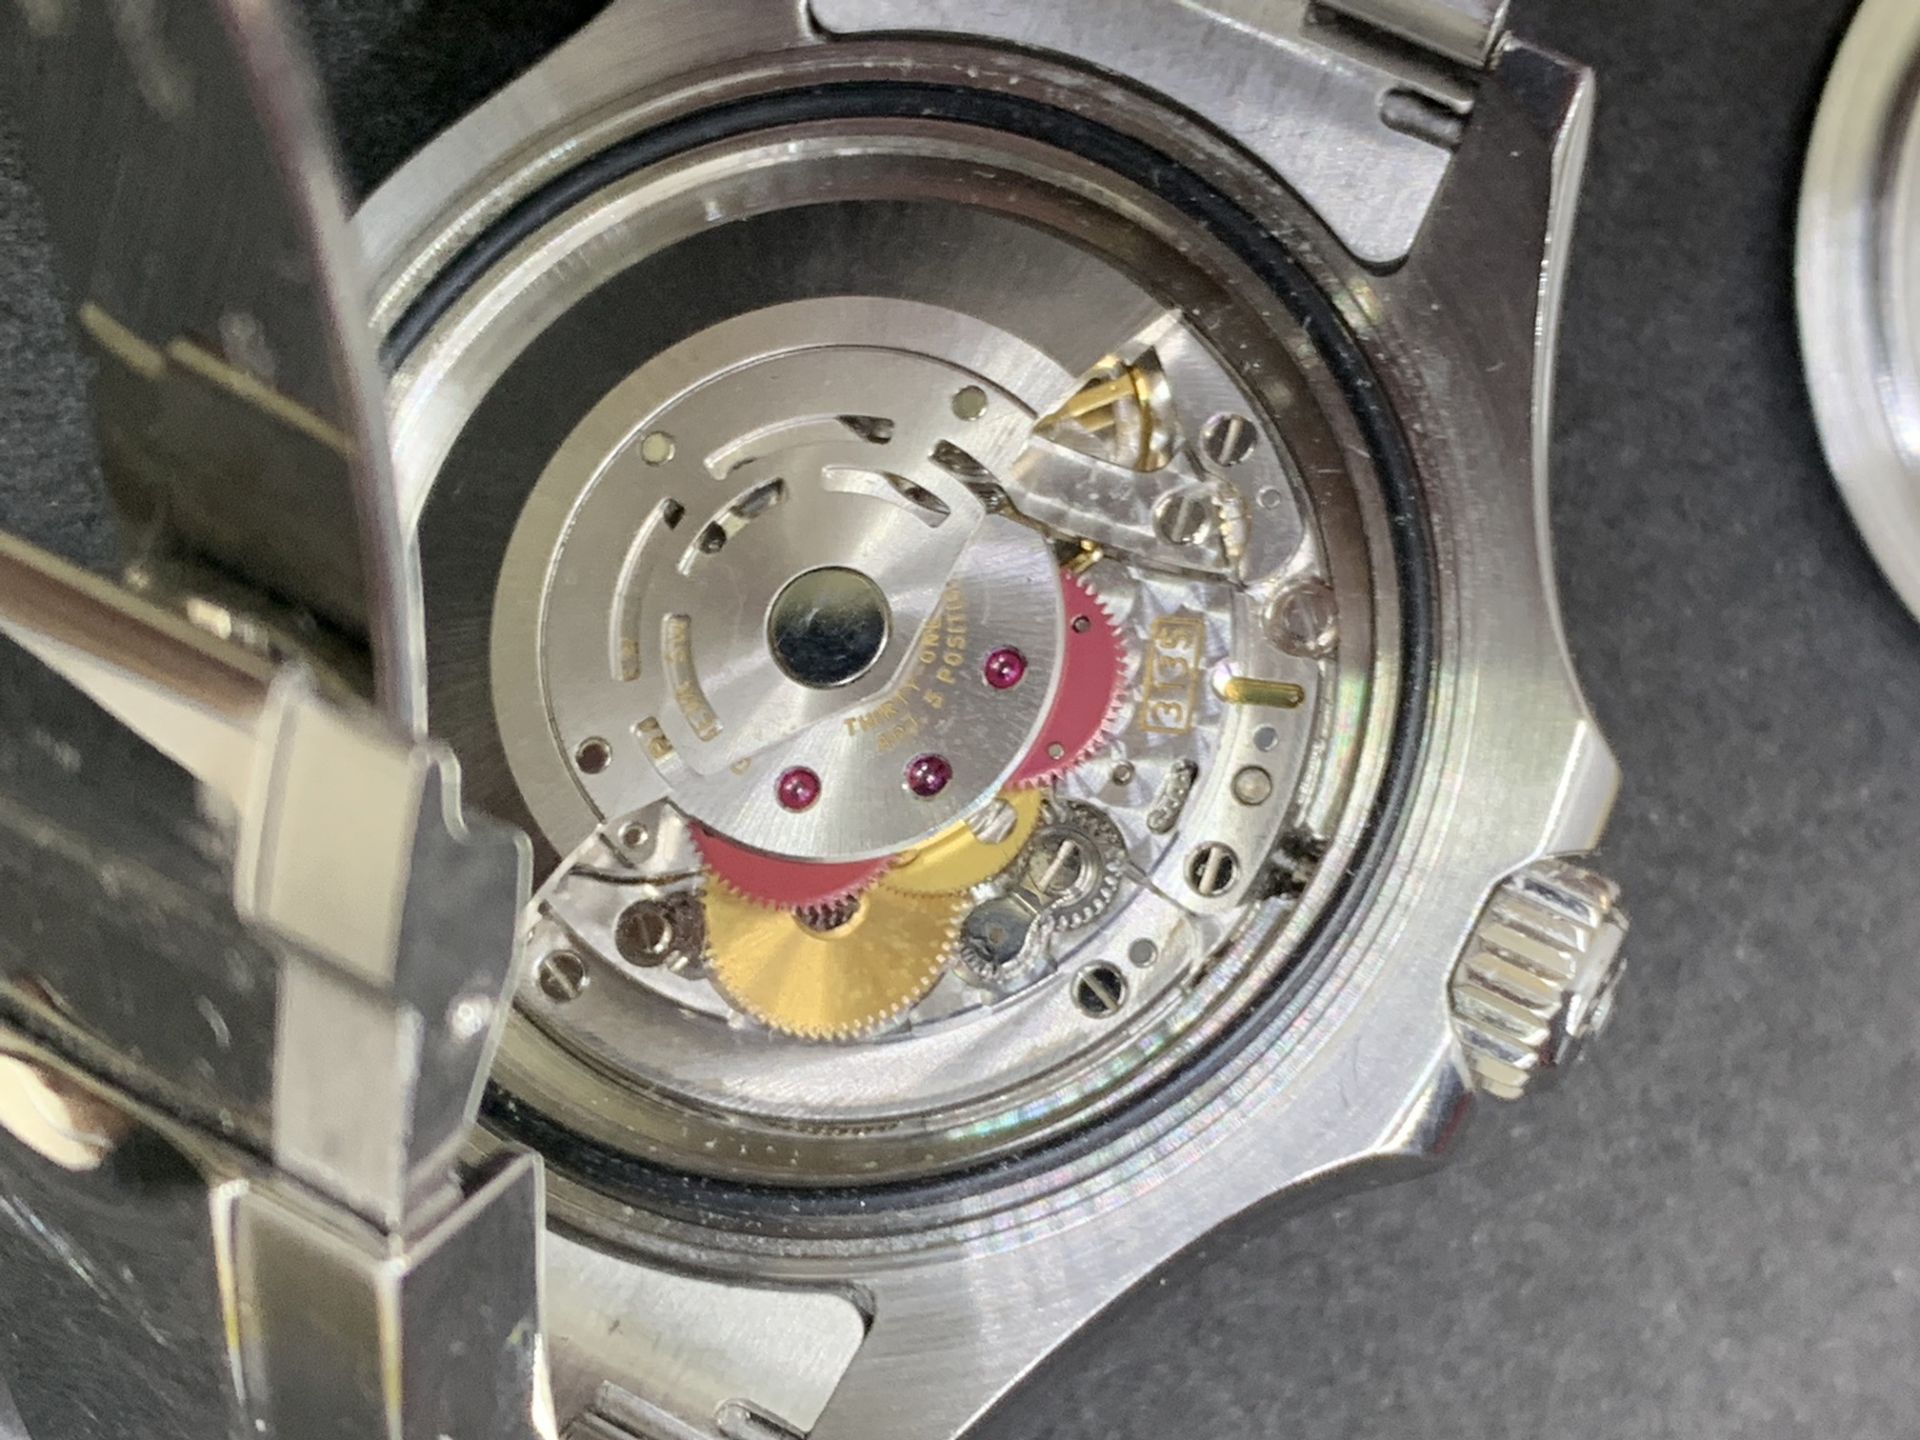 WATCH MARKED ROLEX WITH GENUINE ROLEX MOVEMENT - Image 9 of 10